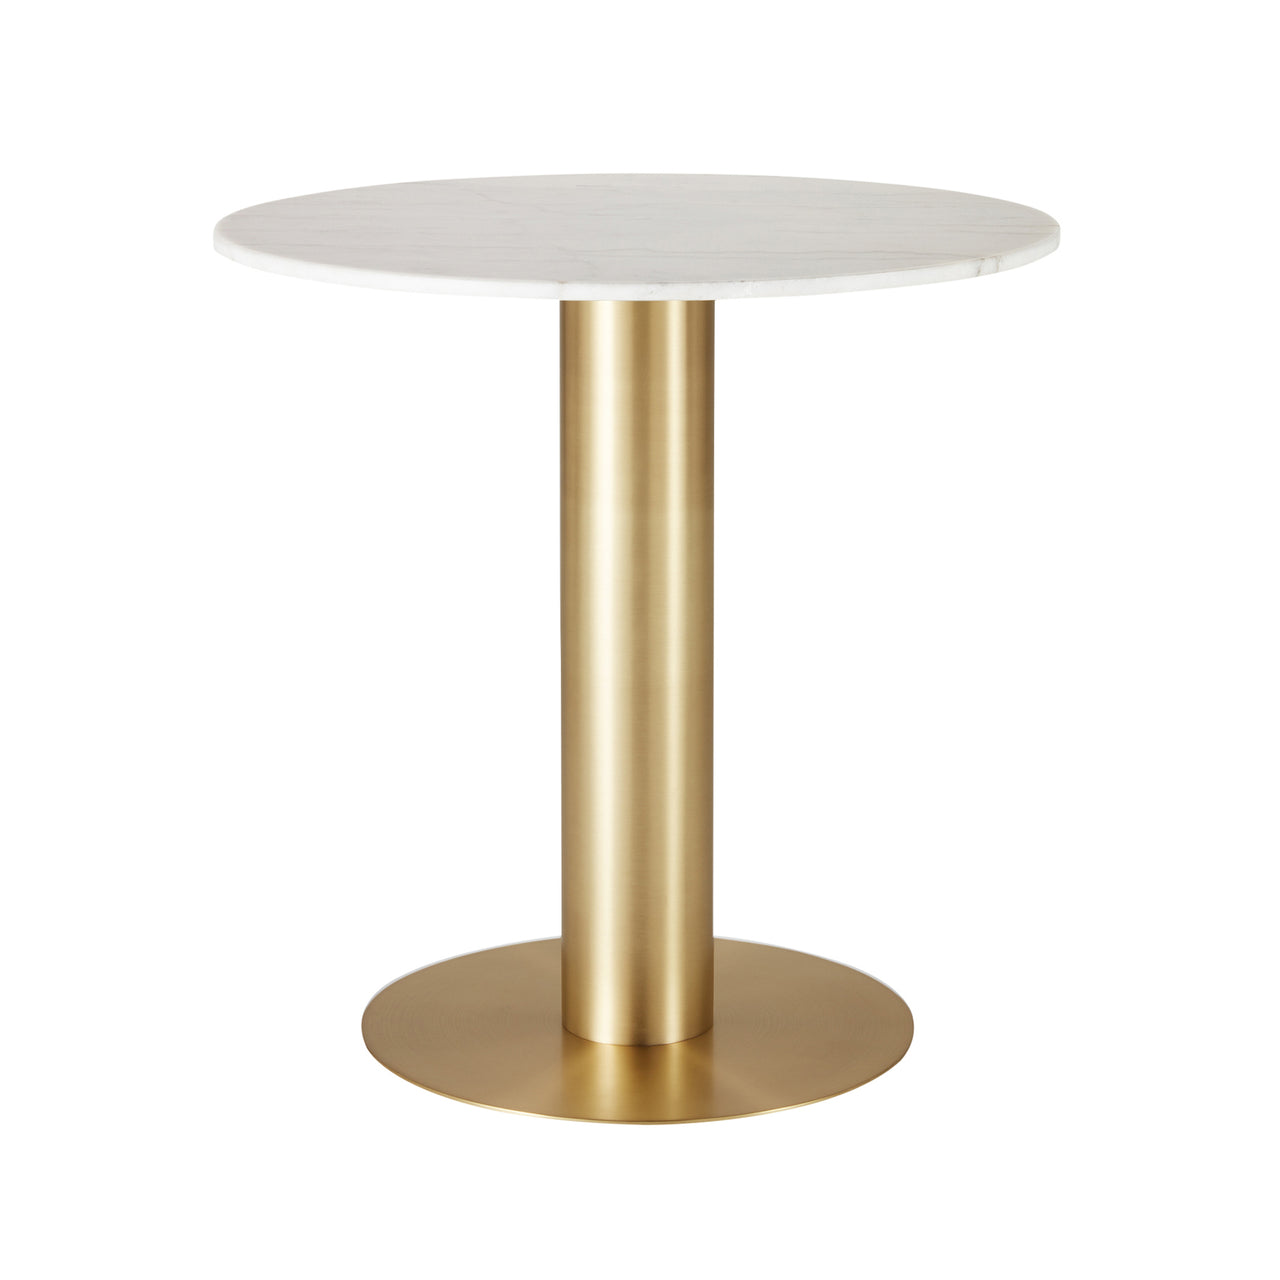 Tube Dining Table: Small - 23.6